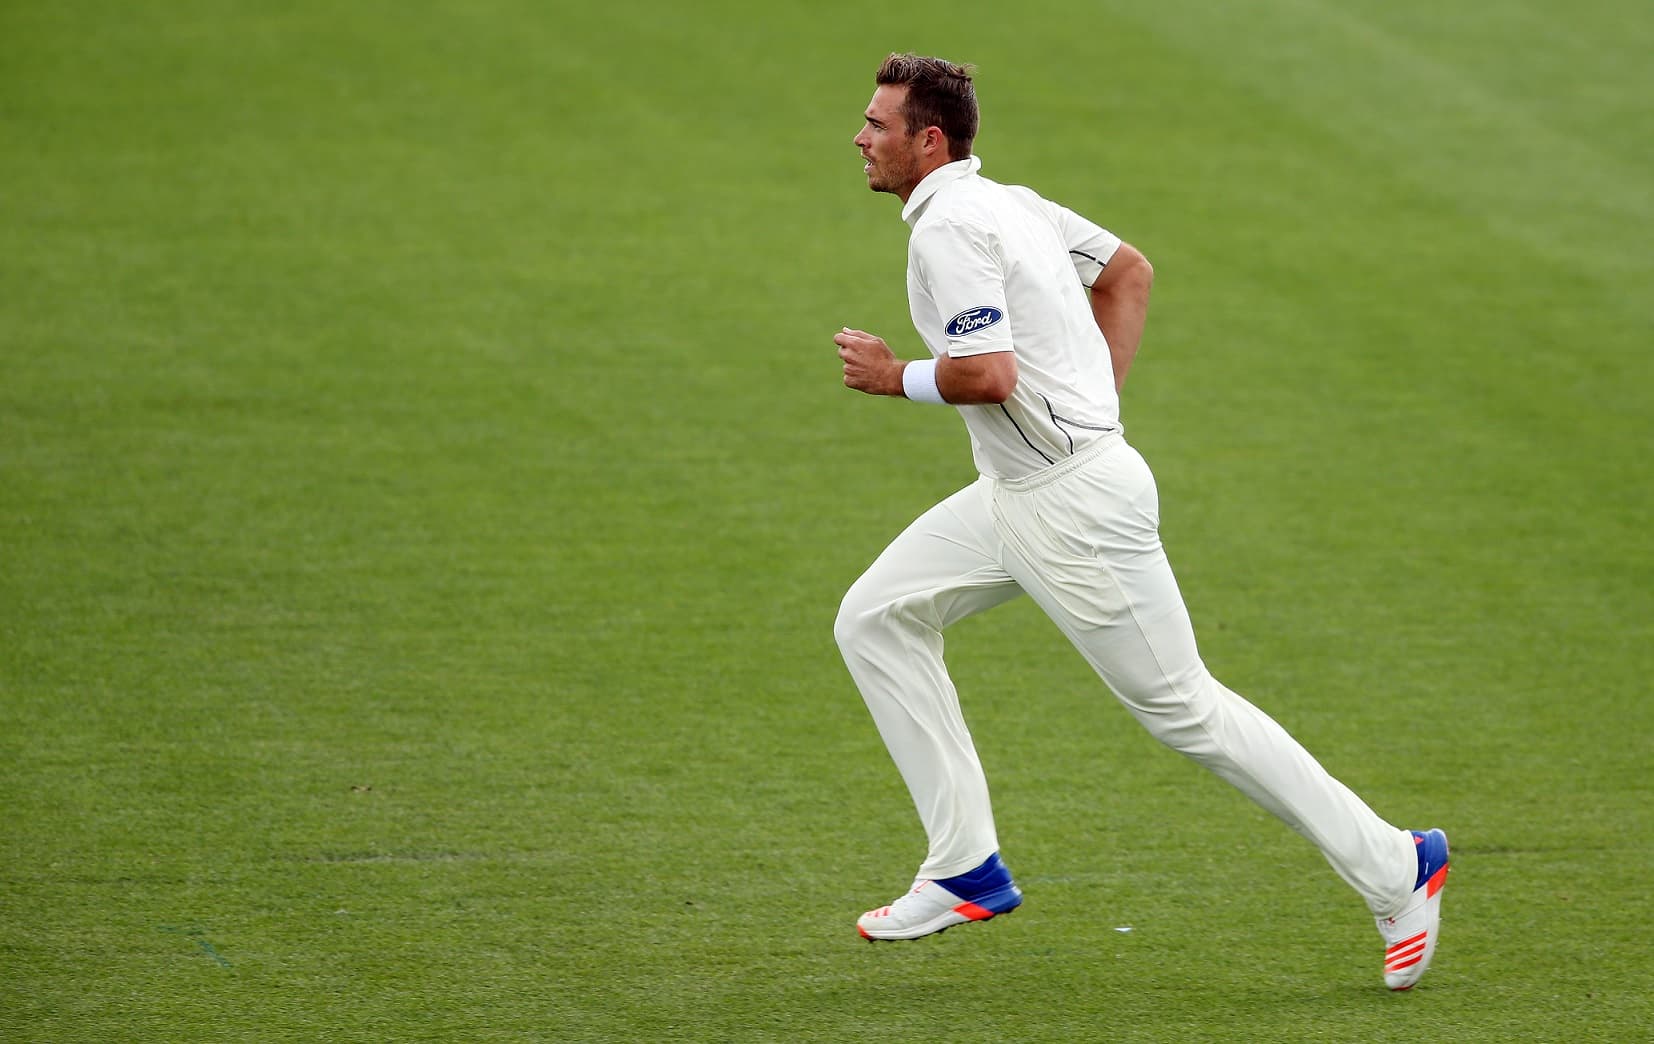 Fired up Southee creates havoc in Pakistan ranks